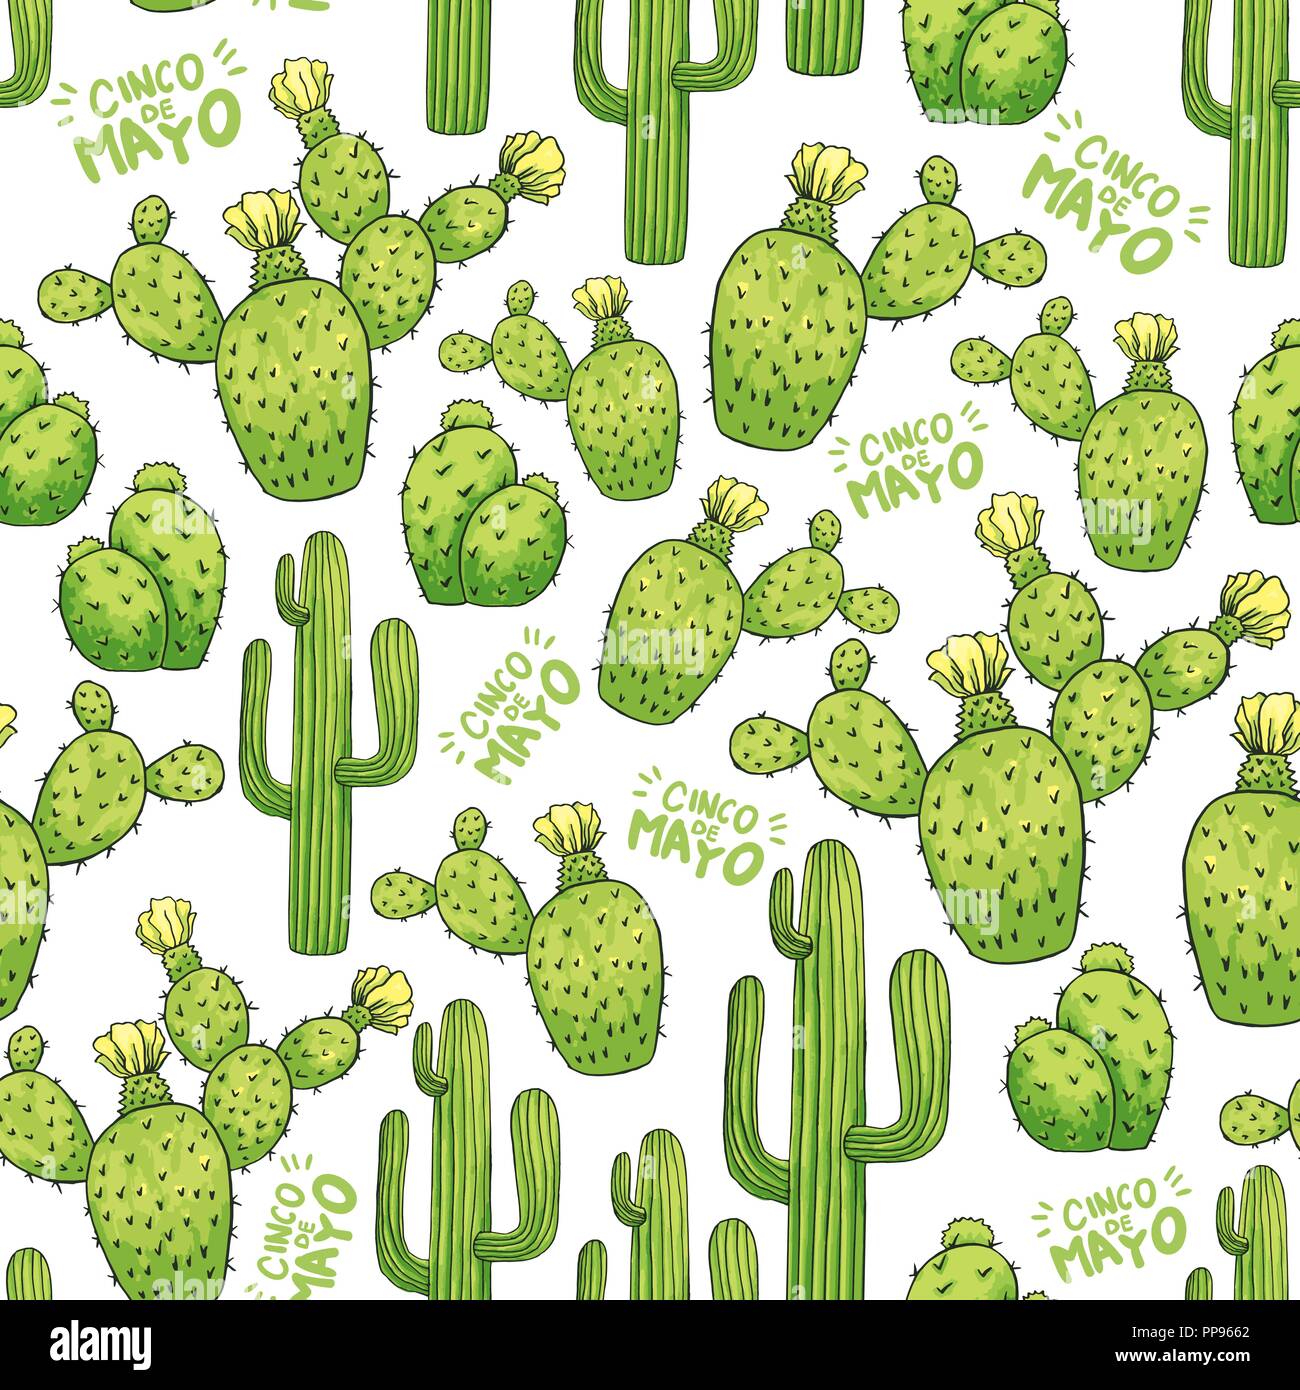 Mexican Cactus Seamless Pattern with Green Lettering Cinco De Mayo. Spines or Thorns and Flowers. Edible Esculent Cacti Like Saguaro, Indian Fig or Mammillaria. Latin theme Stock Vector